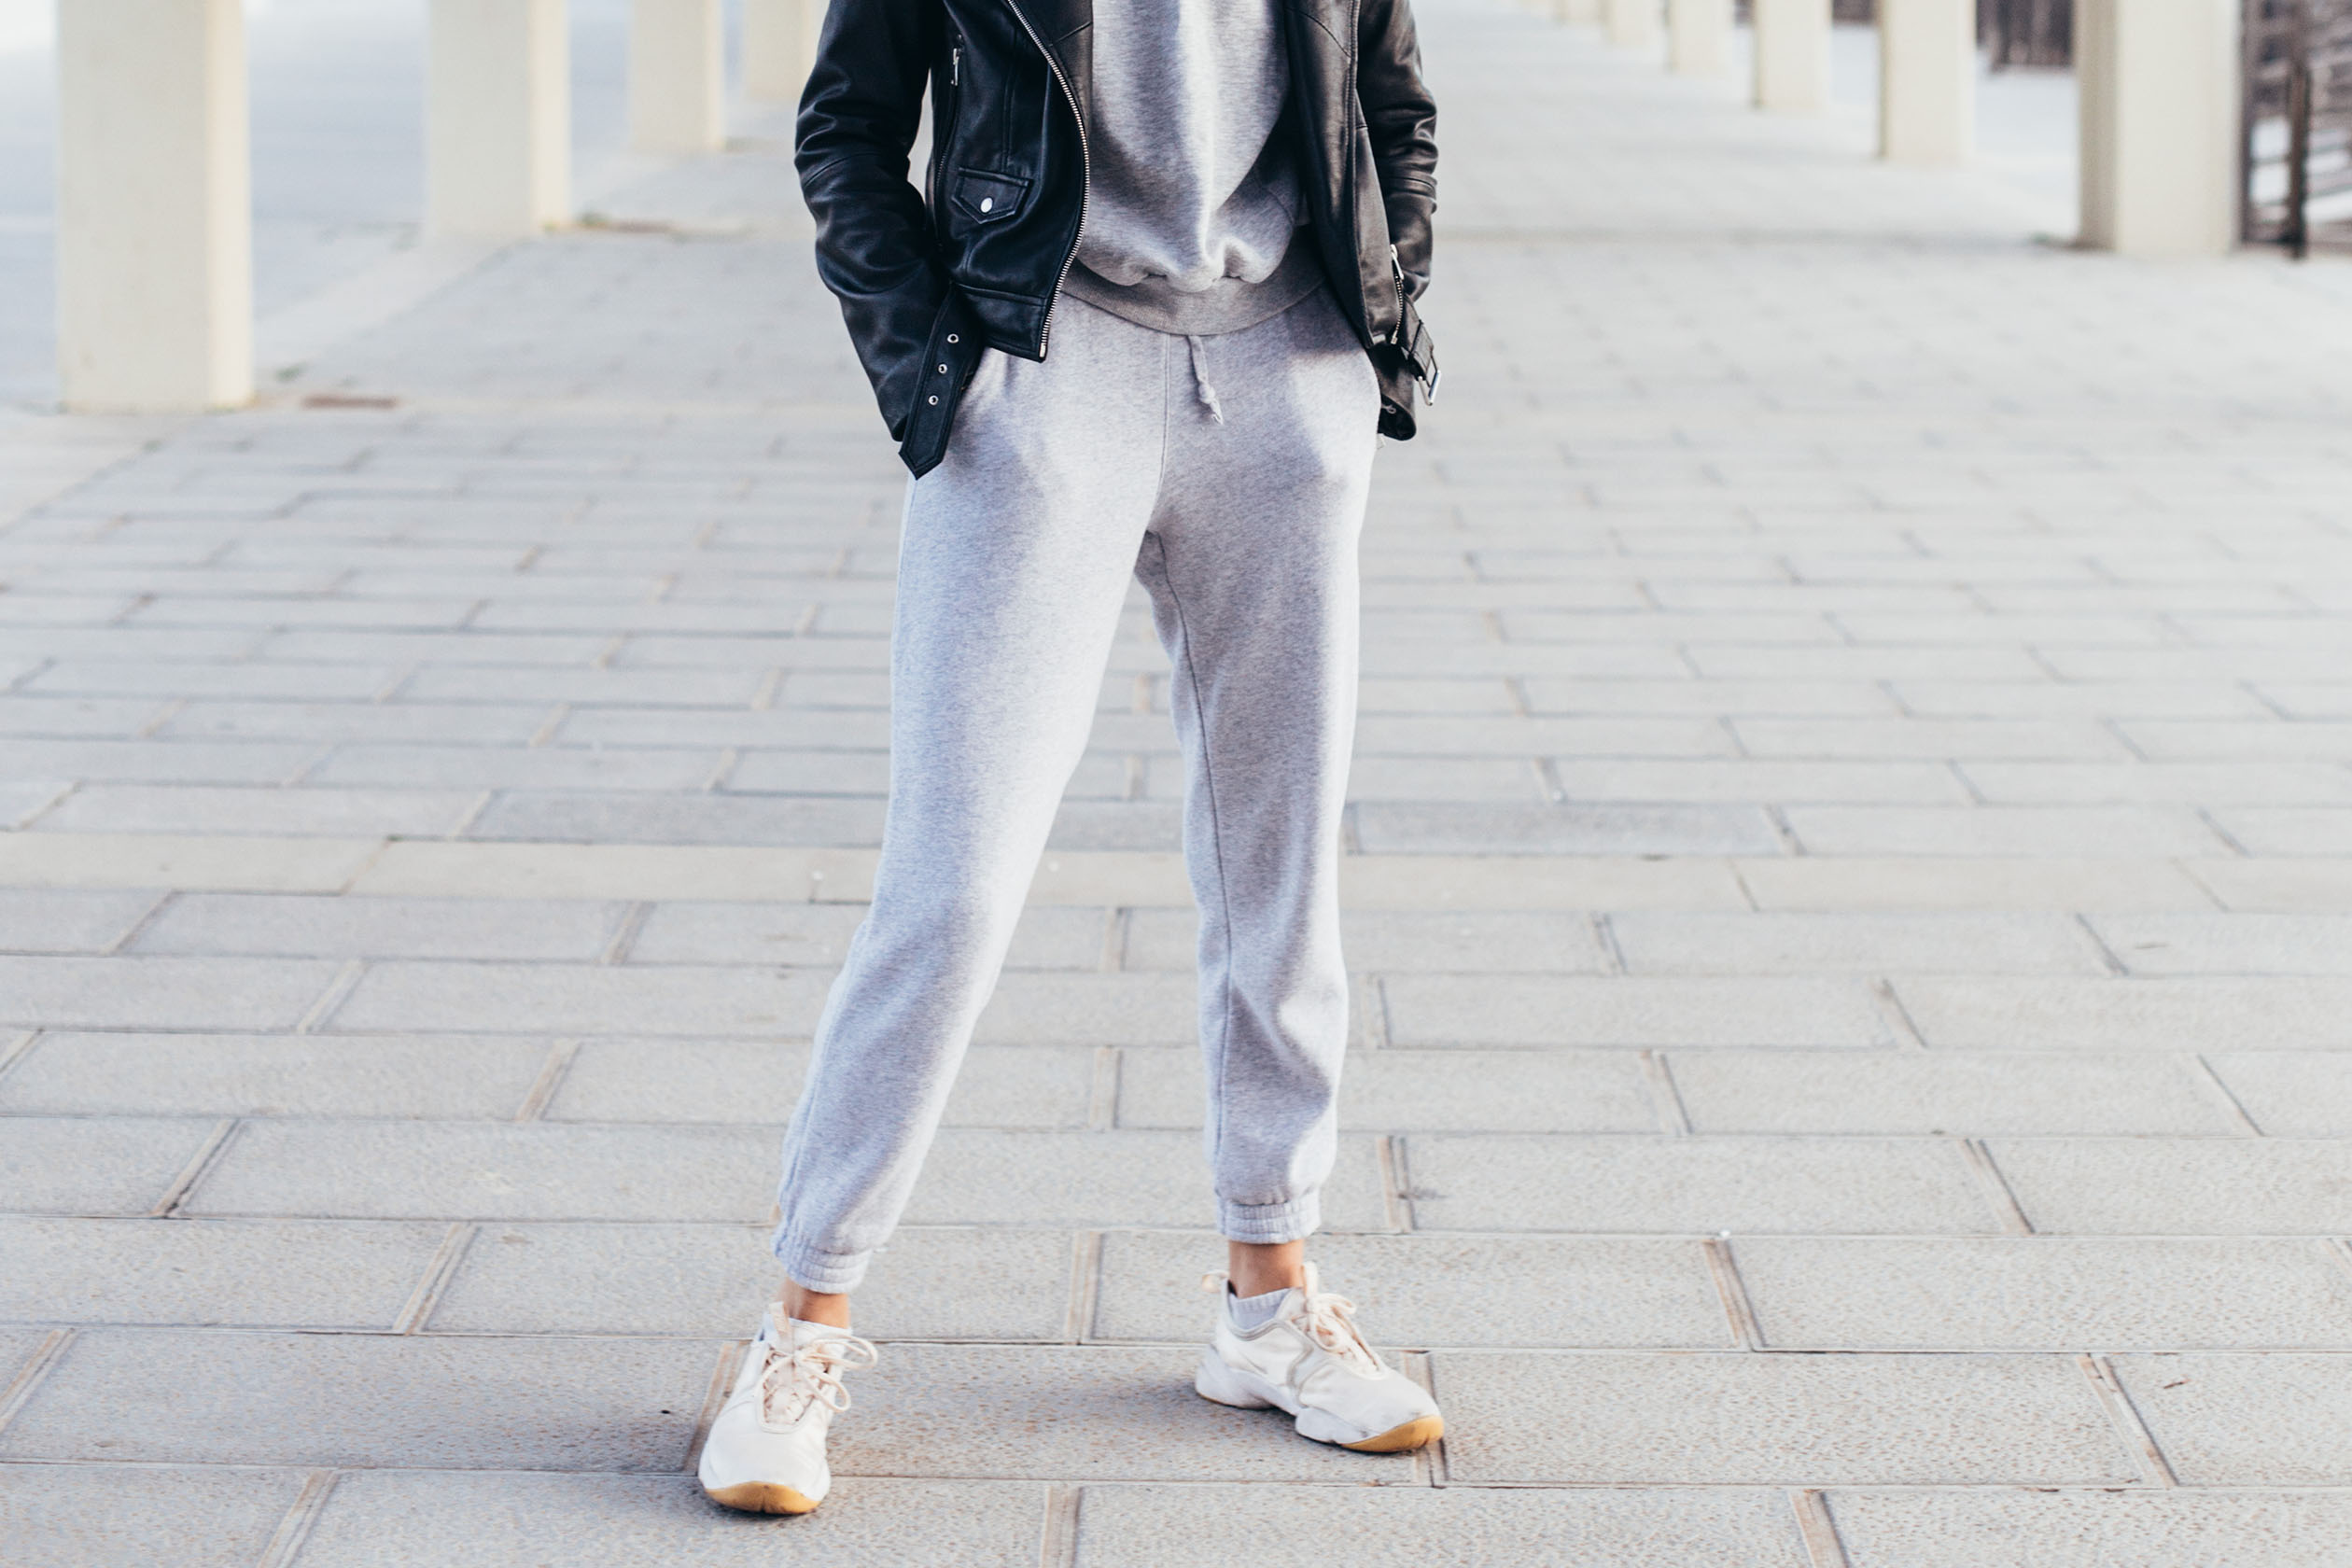 Here's What To Wear With Sweatpants